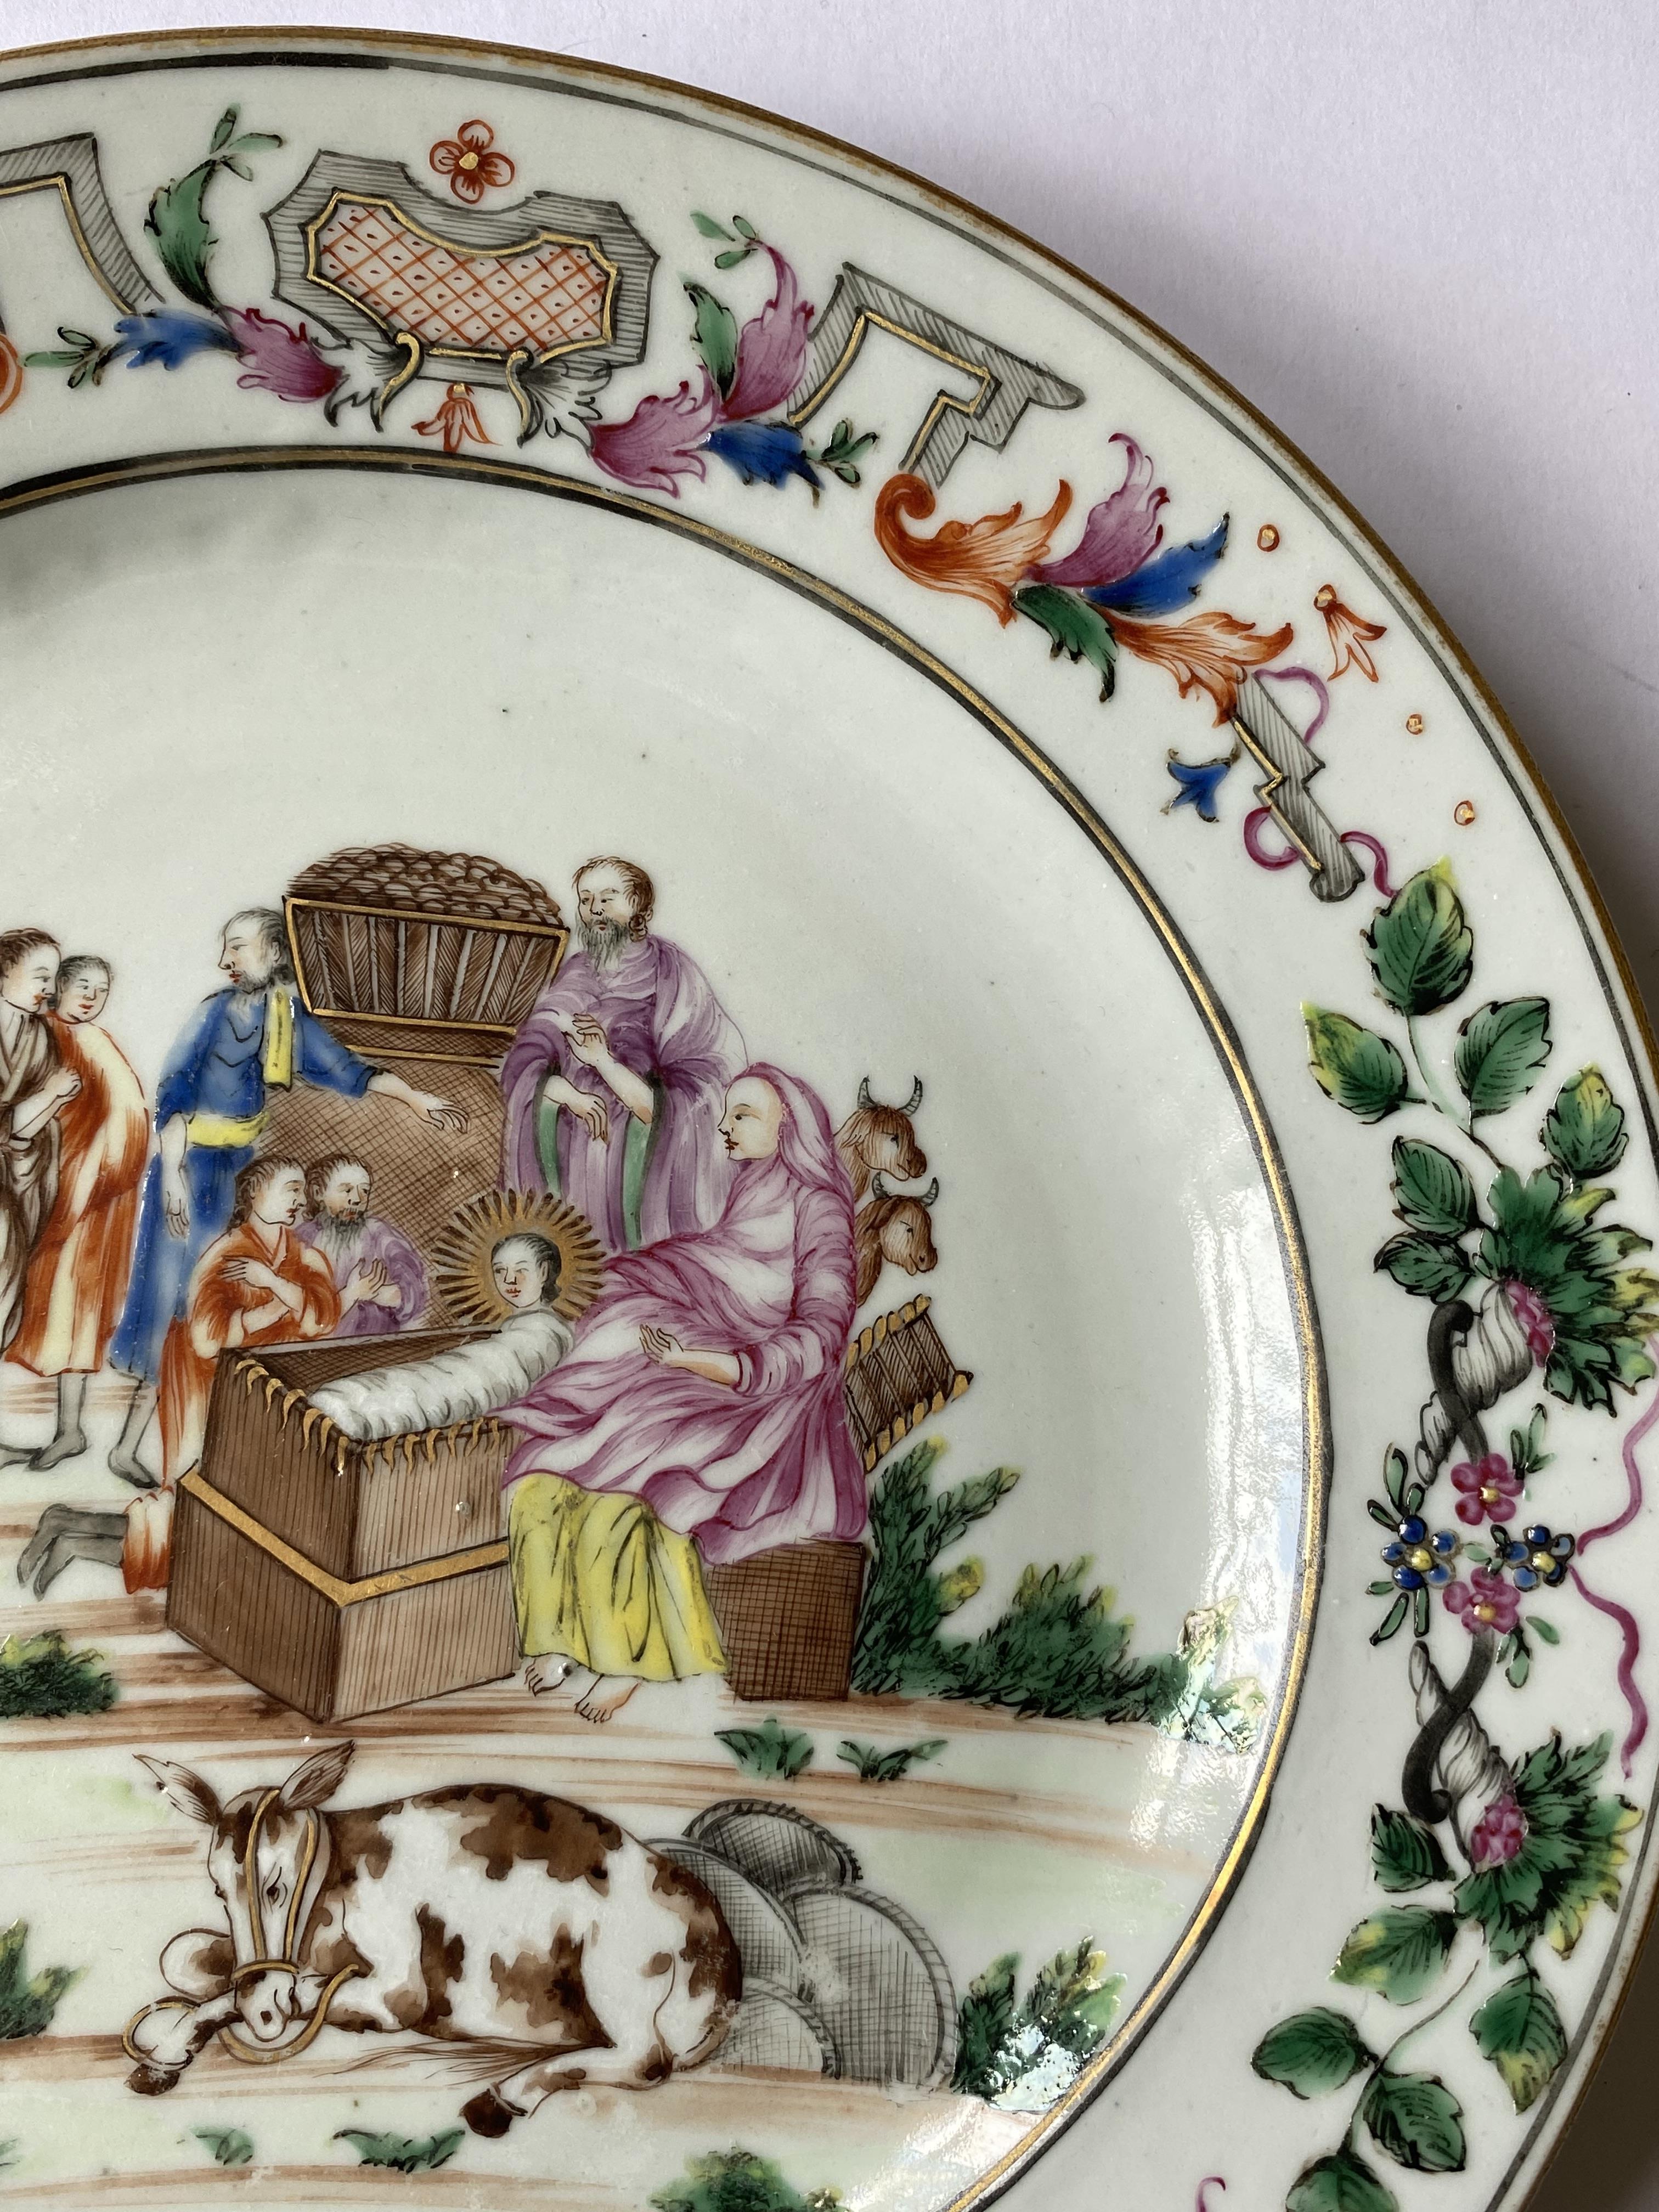 A CHINESE EXPORT PORCELAIN FAMILLE-ROSE 'NATIVITY' PLATE, 18TH CENTURY - Image 4 of 5